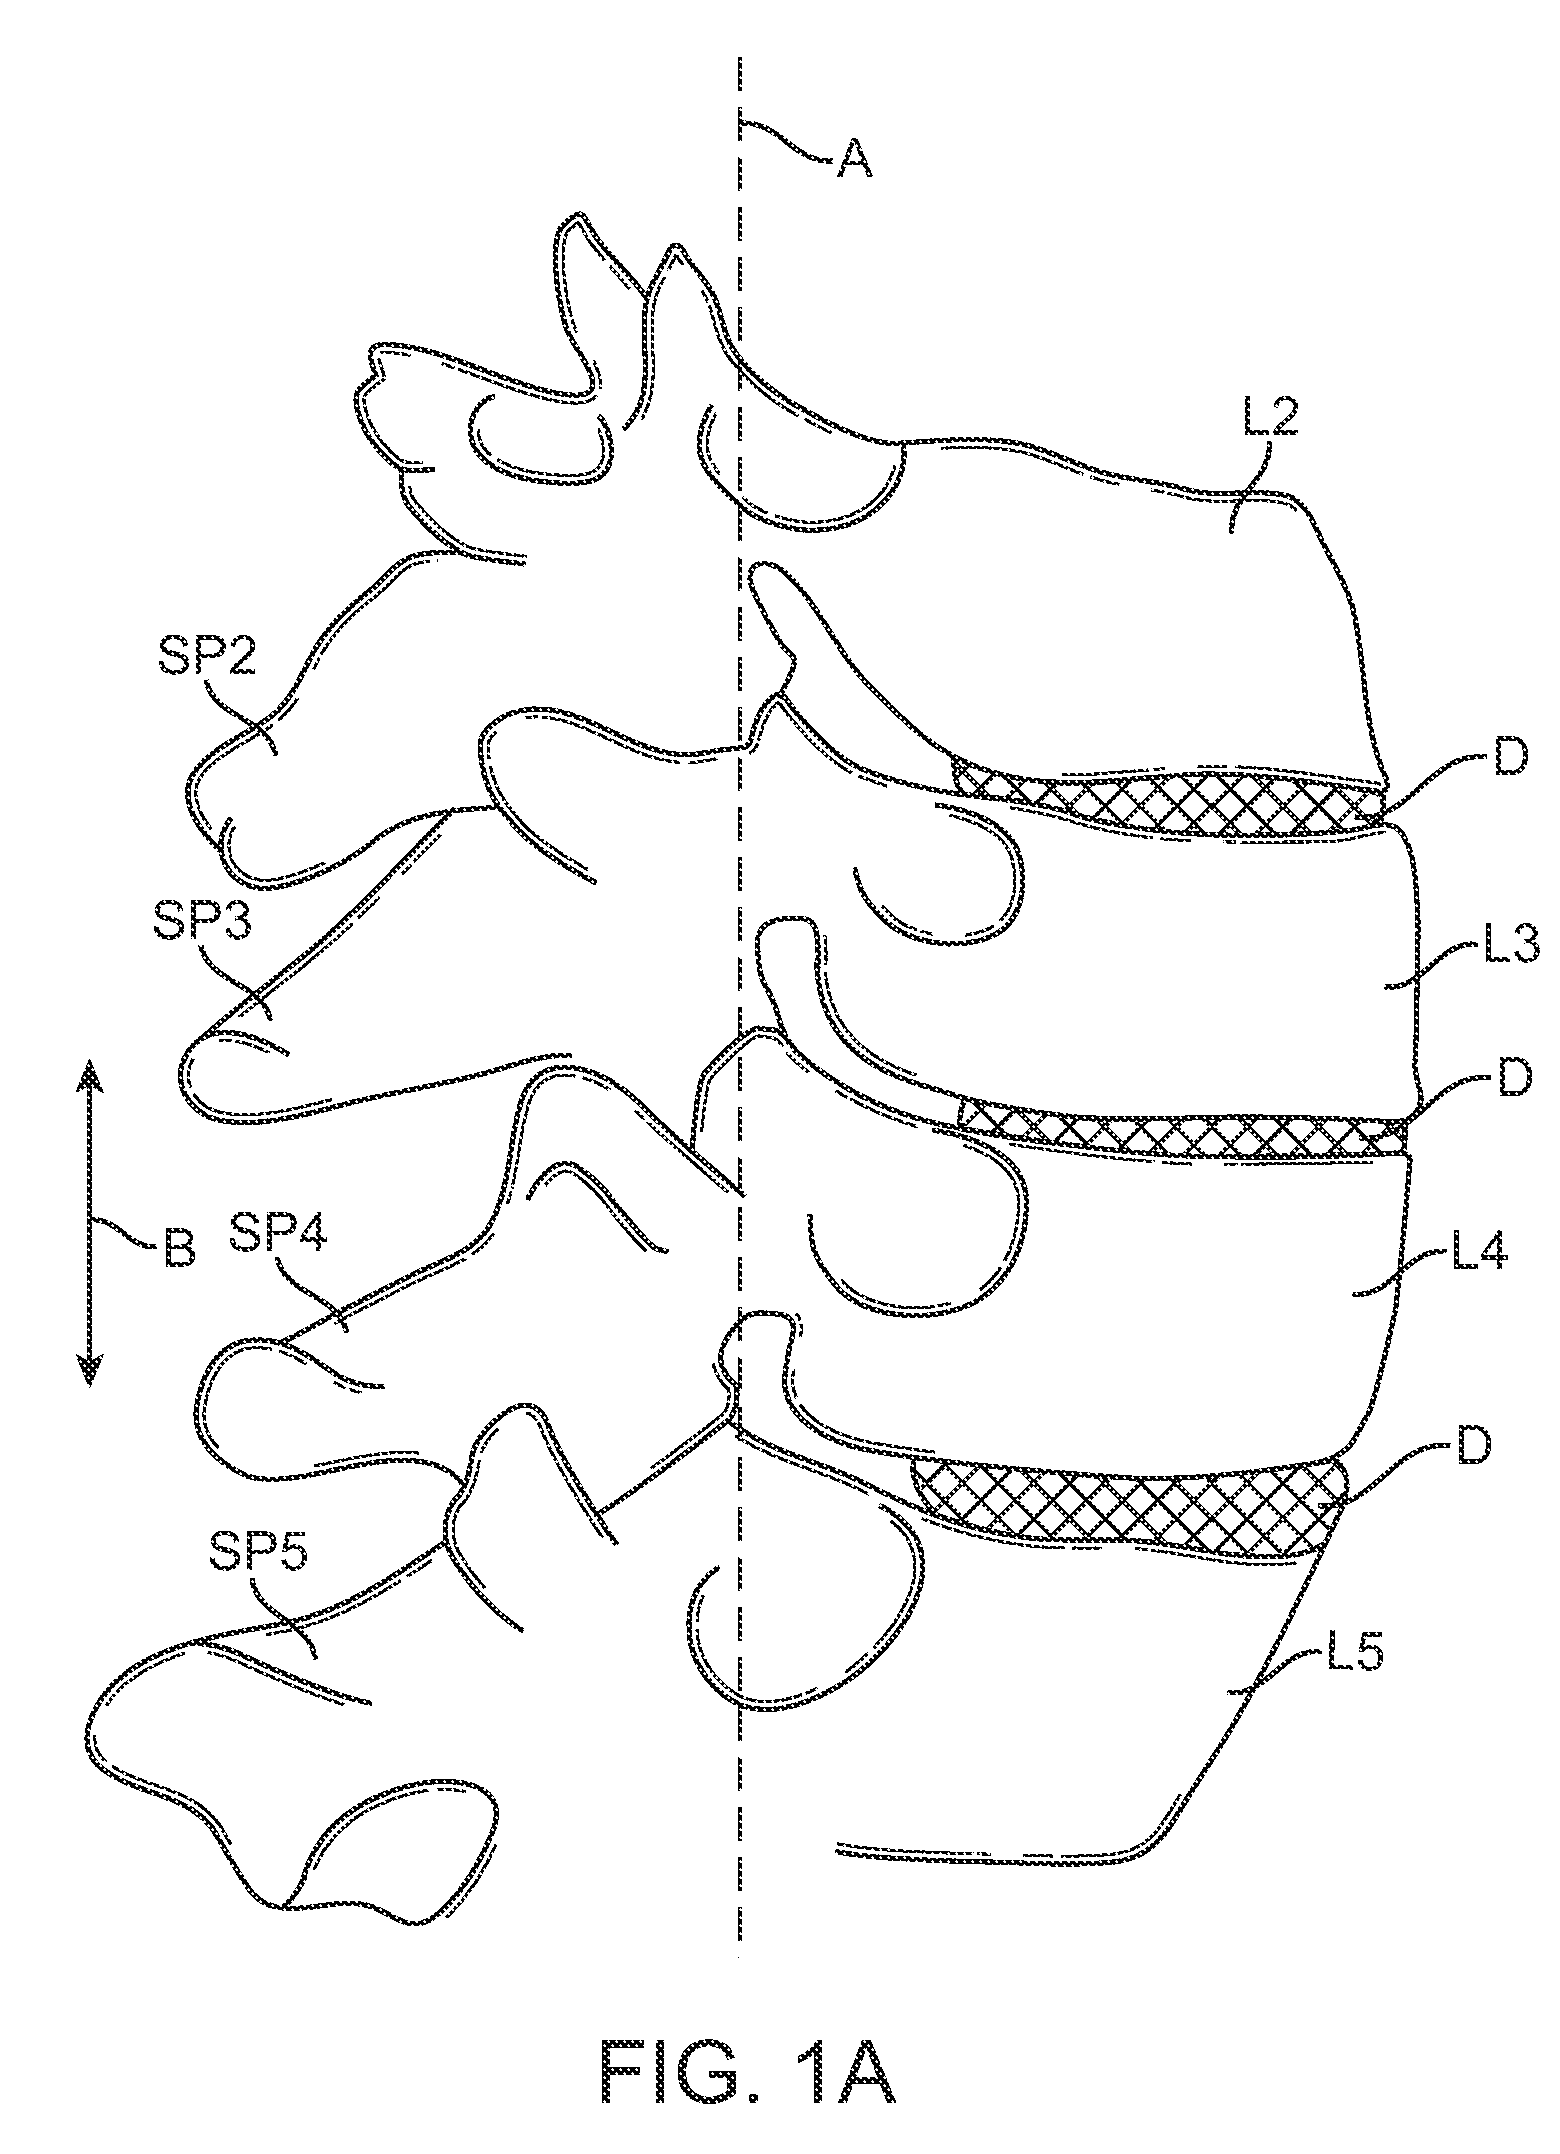 Methods and systems for increasing the bending stiffness and constraining the spreading of a spinal segment